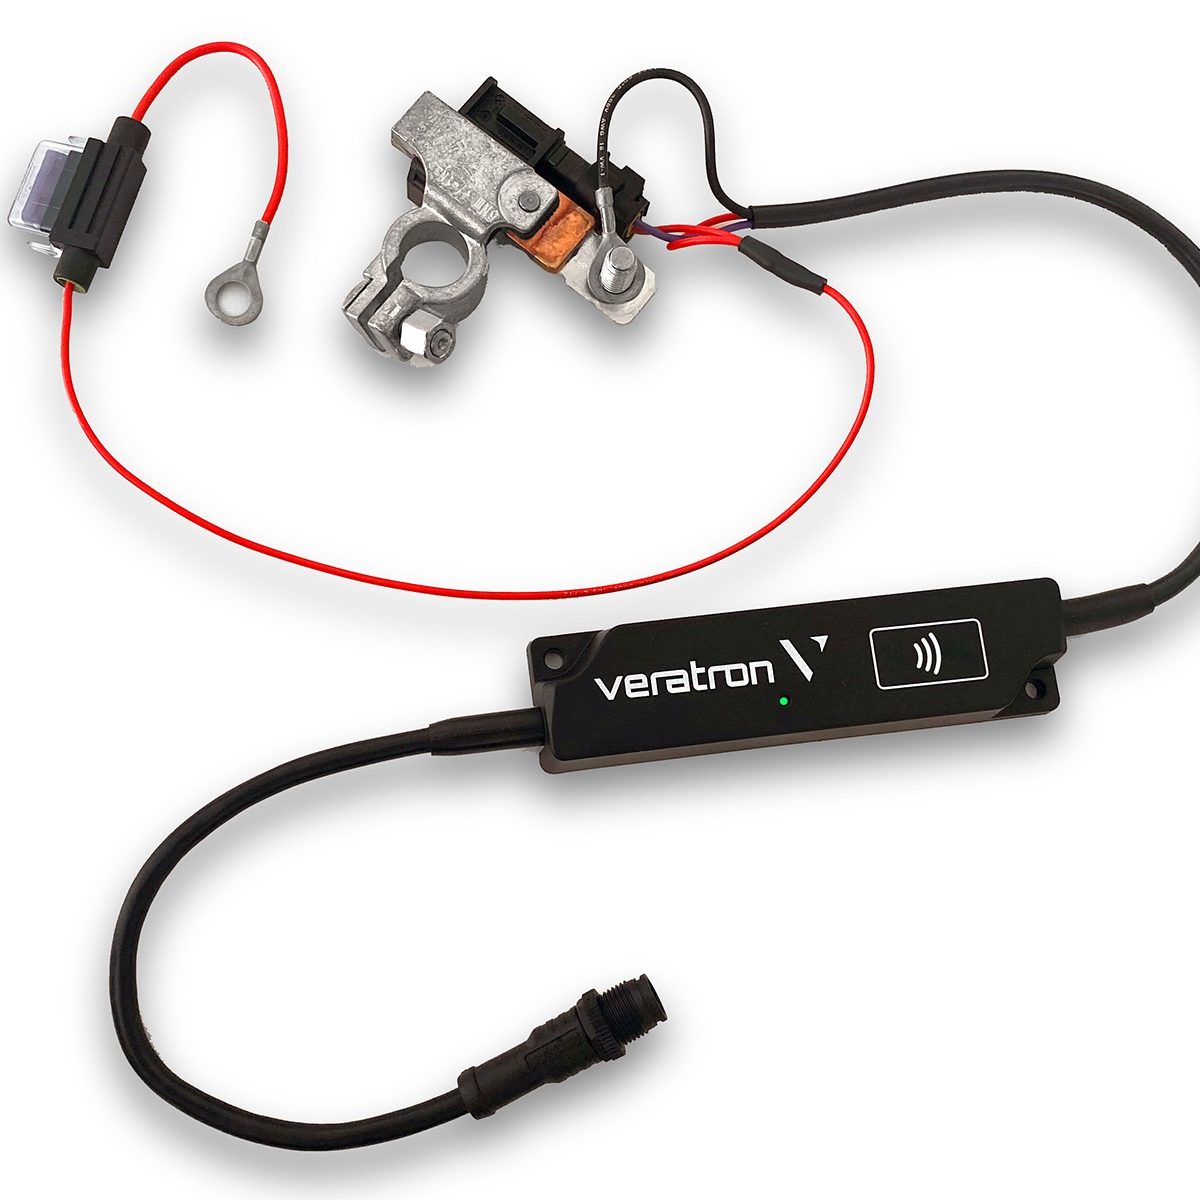 Veratron LinkUp battery monitor, innovative configuration and NMEA 2000 -  Panbo